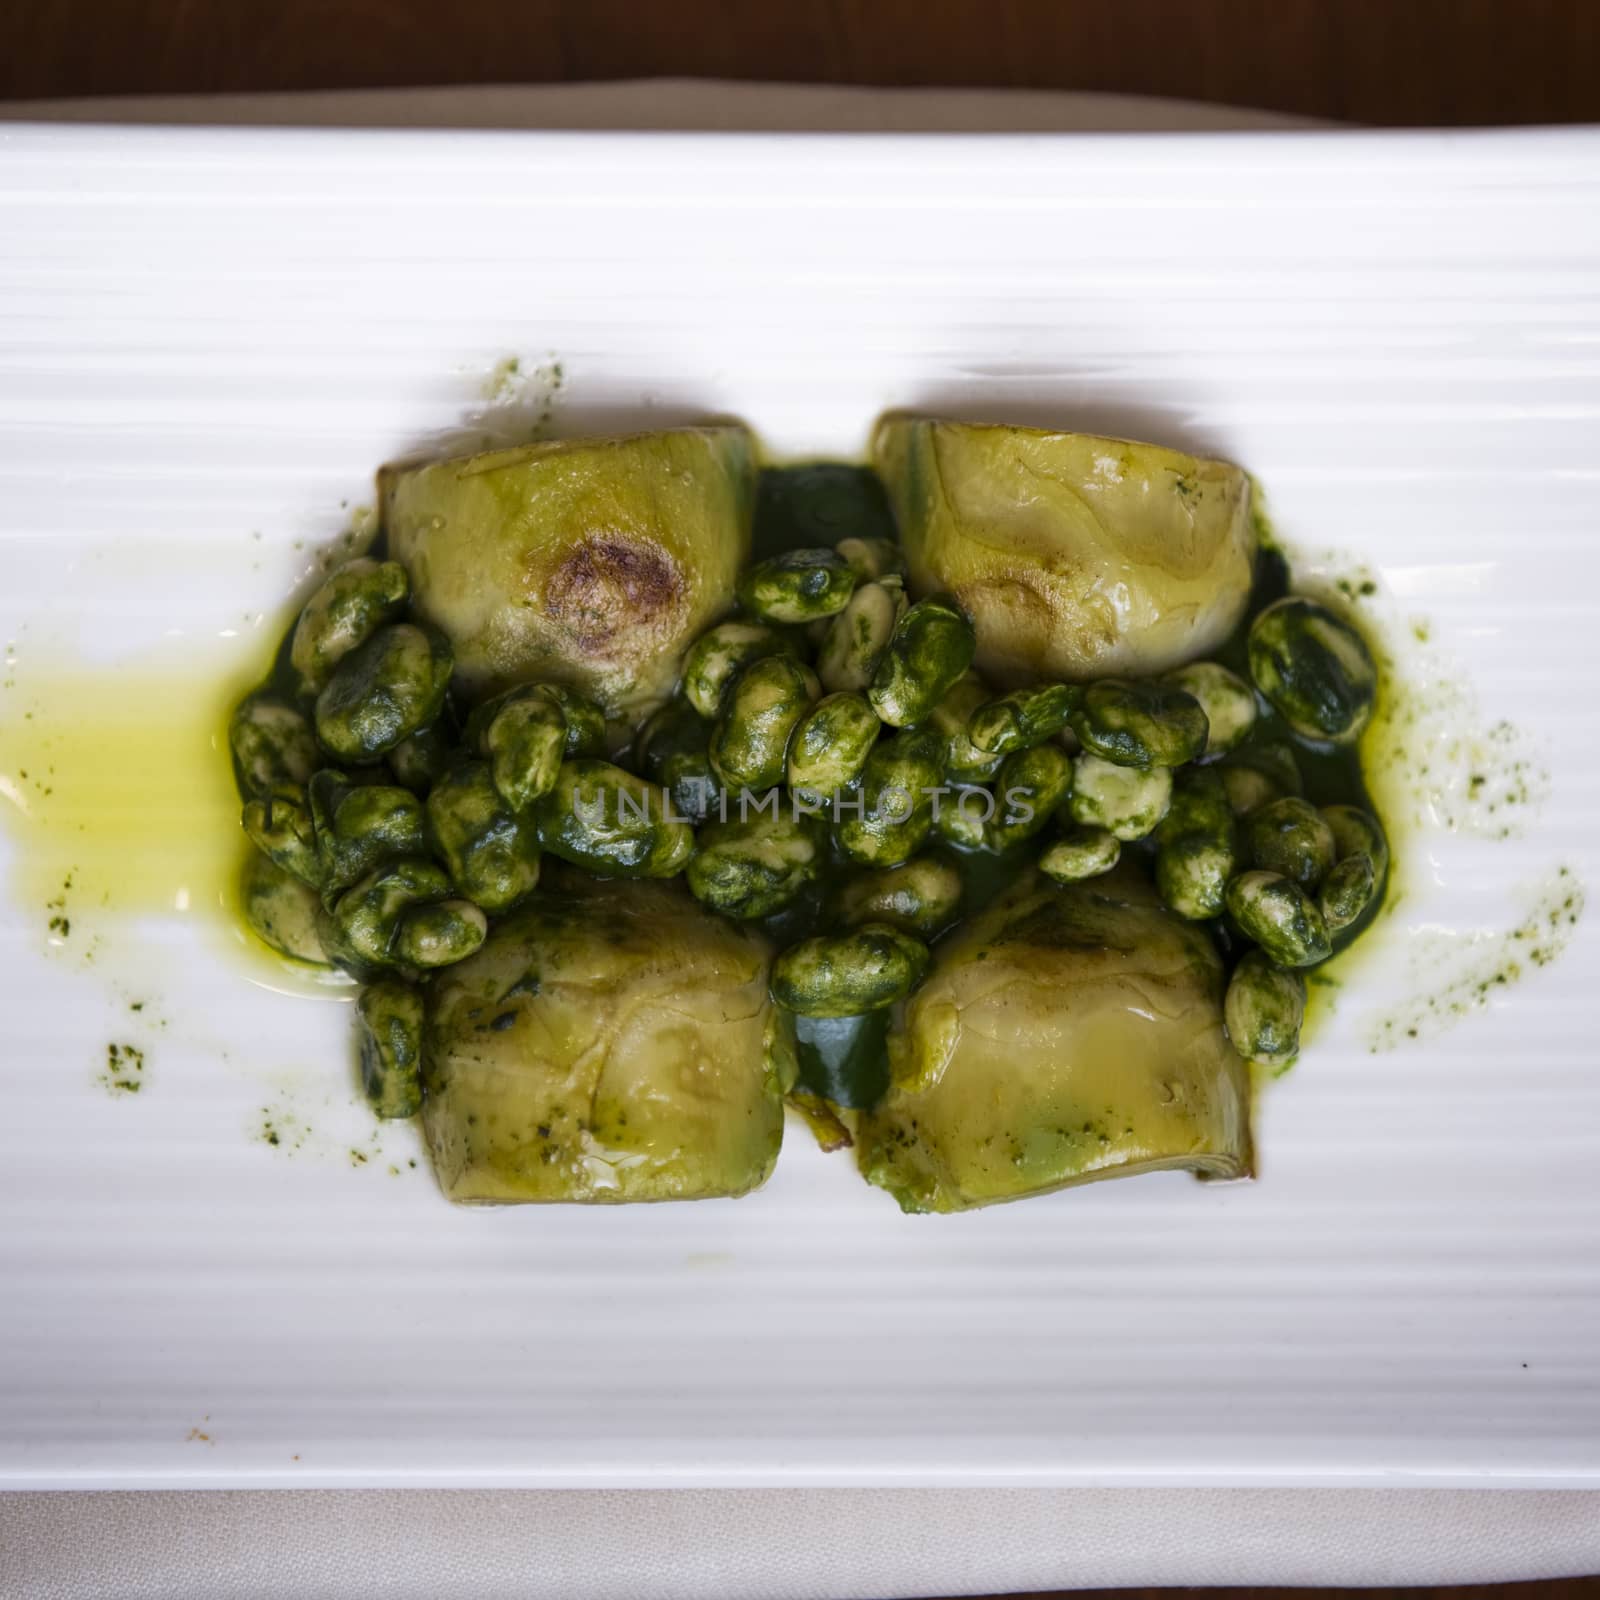 Broad Beans with Spinachs and Artichokes dressed with Olive Oil by Nemida